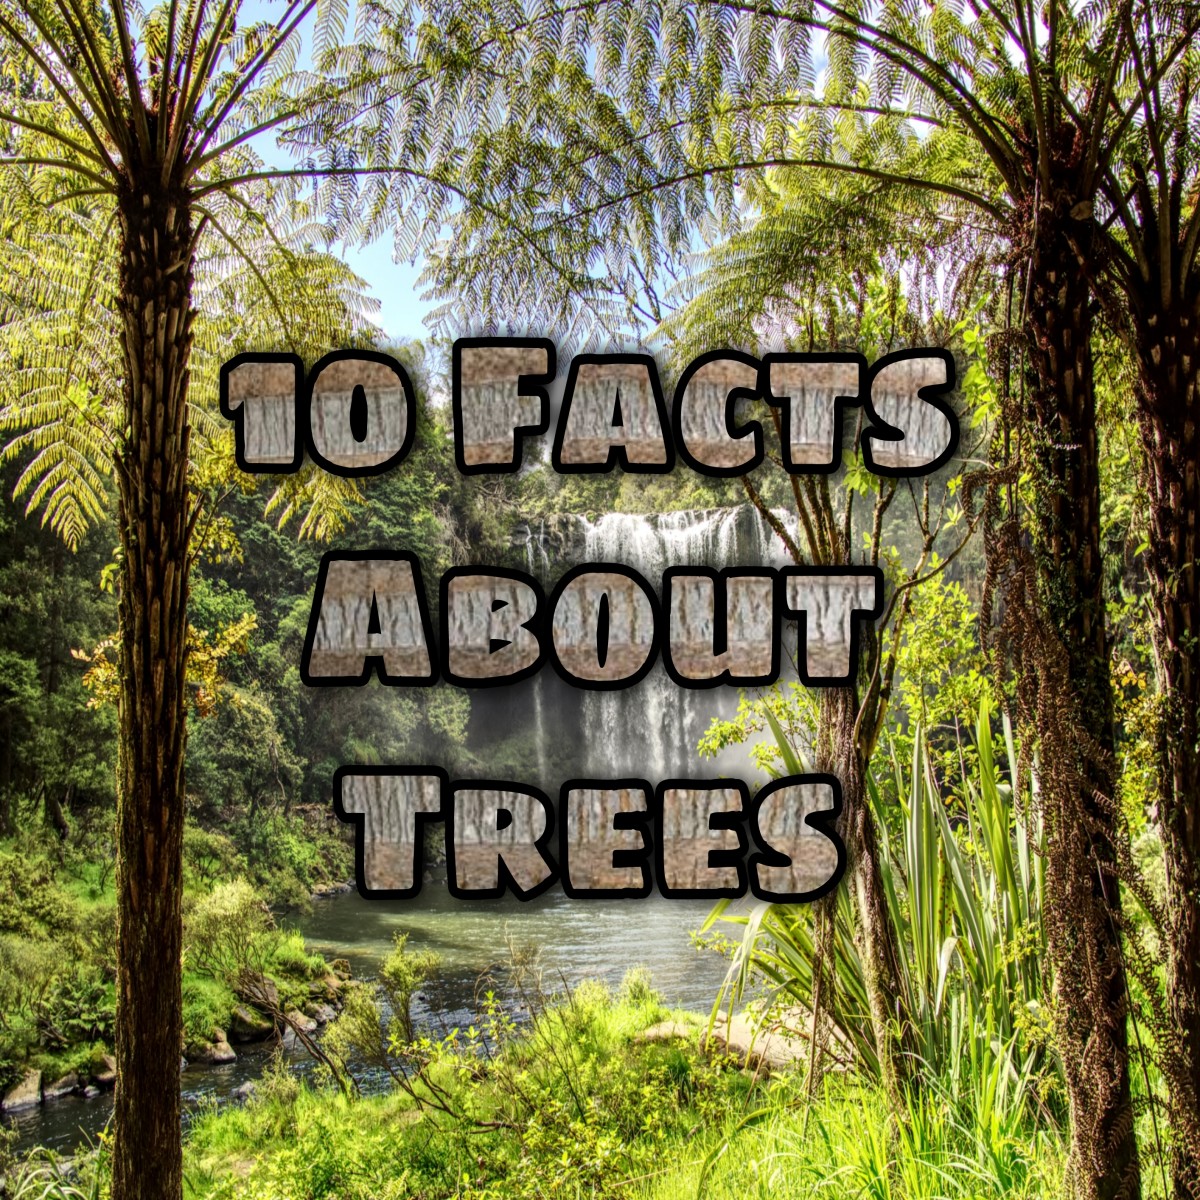 This article will provide 10 fascinating facts about trees that you perhaps did not know.